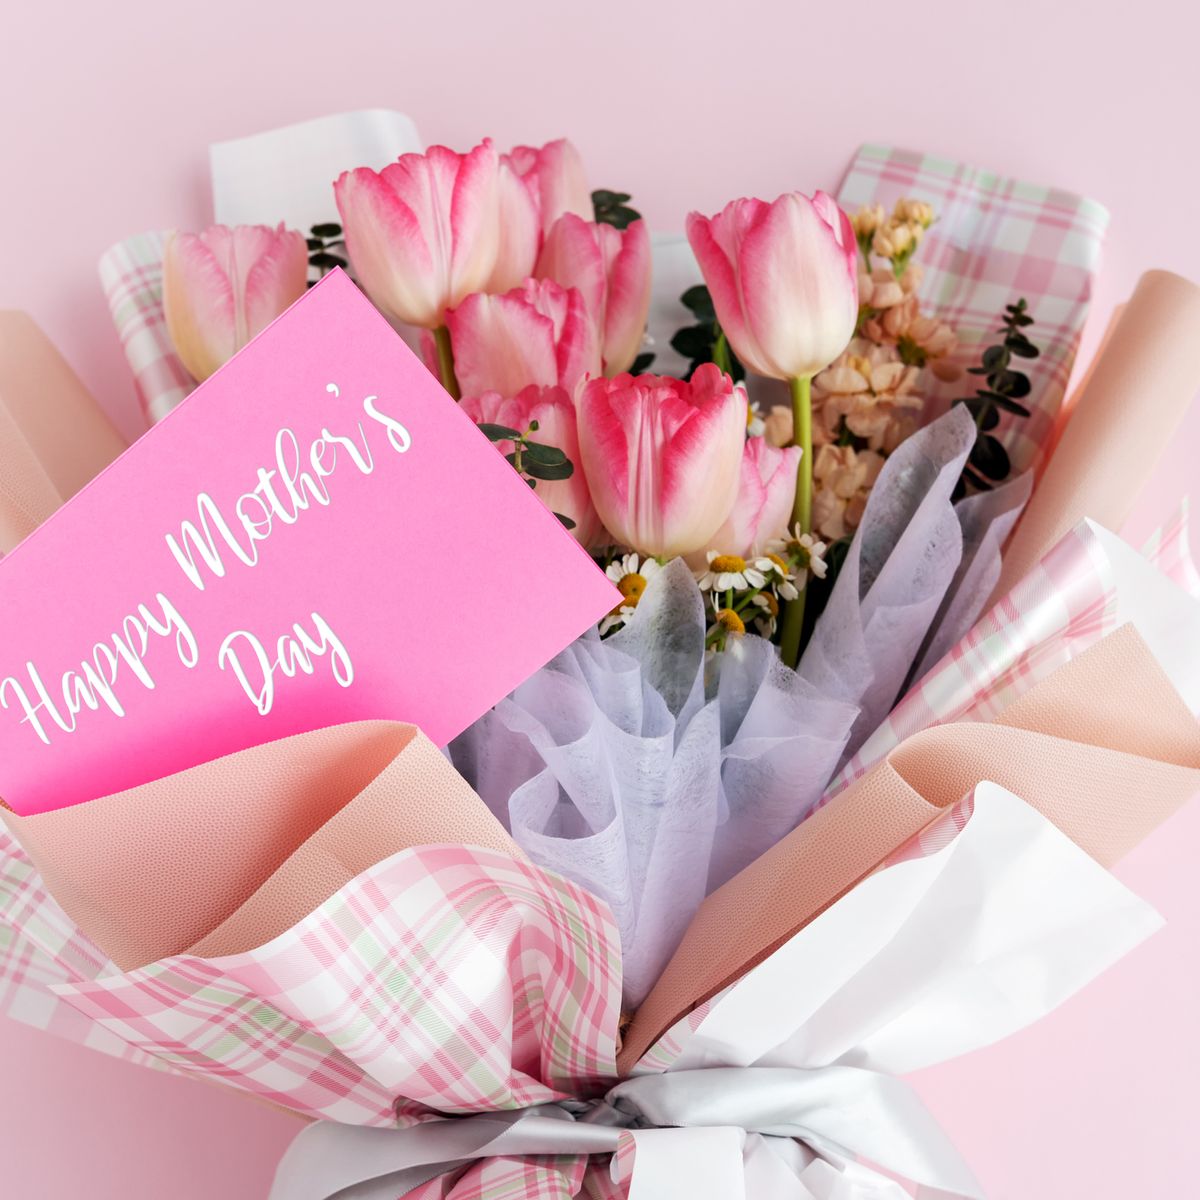 https://hips.hearstapps.com/hmg-prod/images/happy-mothers-day-tulip-bouquet-royalty-free-image-1674601167.jpg?crop=0.668xw:1.00xh;0.141xw,0&resize=1200:*